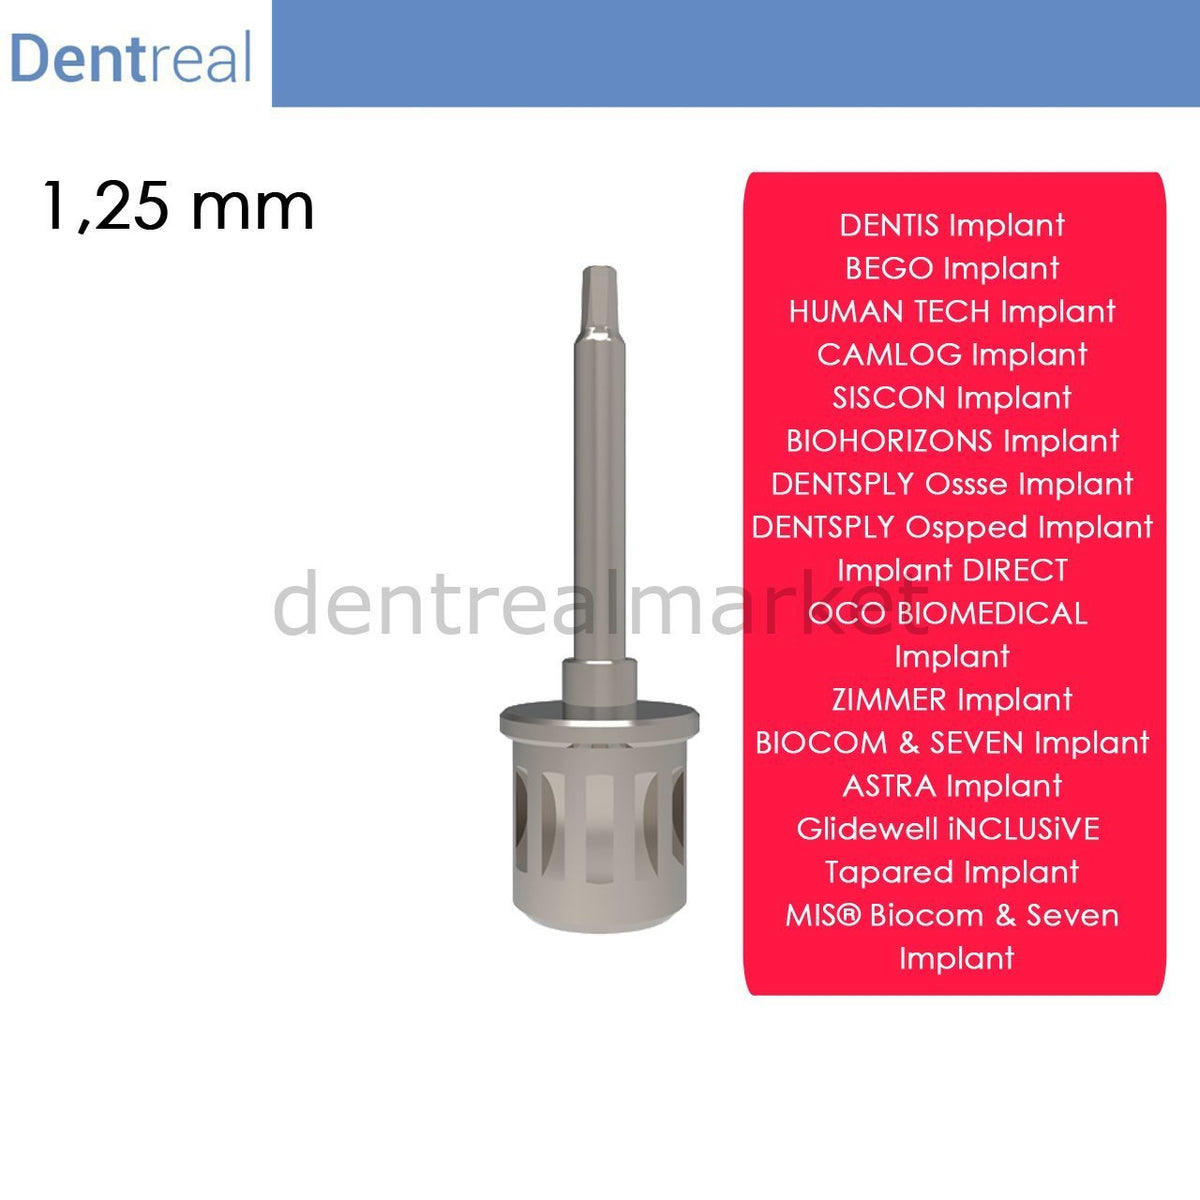 DentrealStore - Dentreal Screwdriver for Human Tech Implant - 1,25 mm Hex Driver